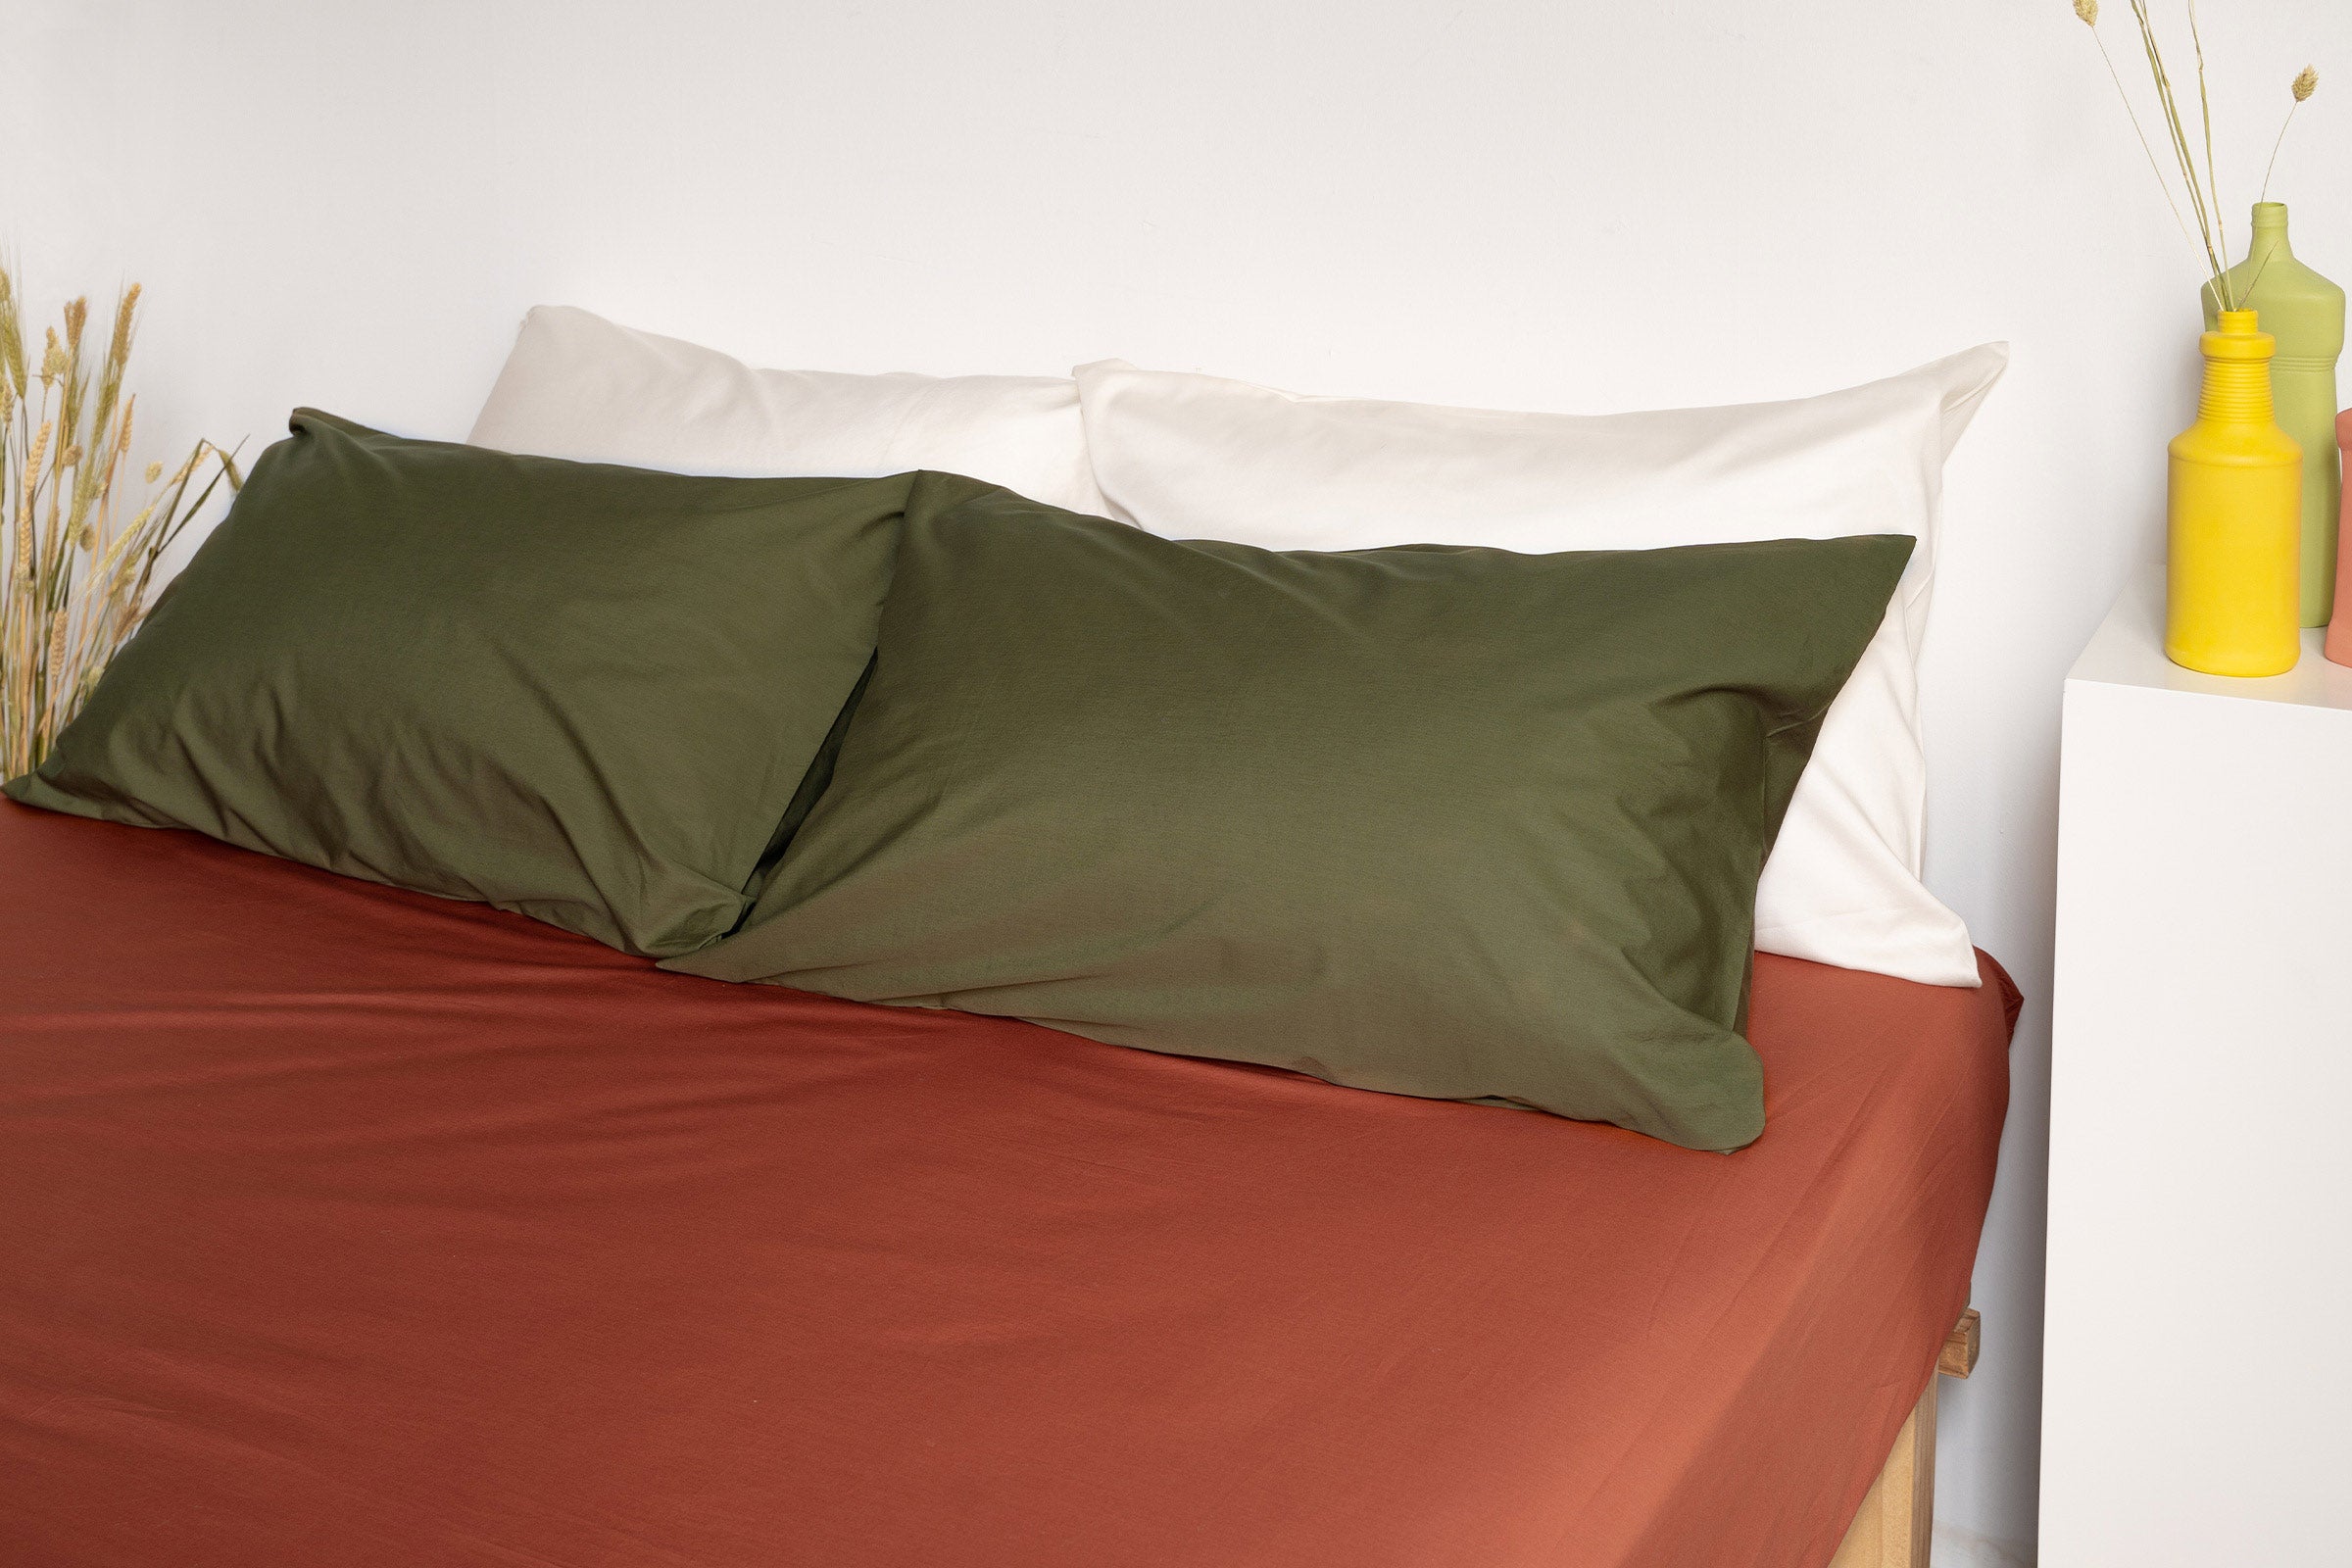 crisp-clay-fitted-sheet-olive-white-pillowcase-pair-by-sojao.jpg